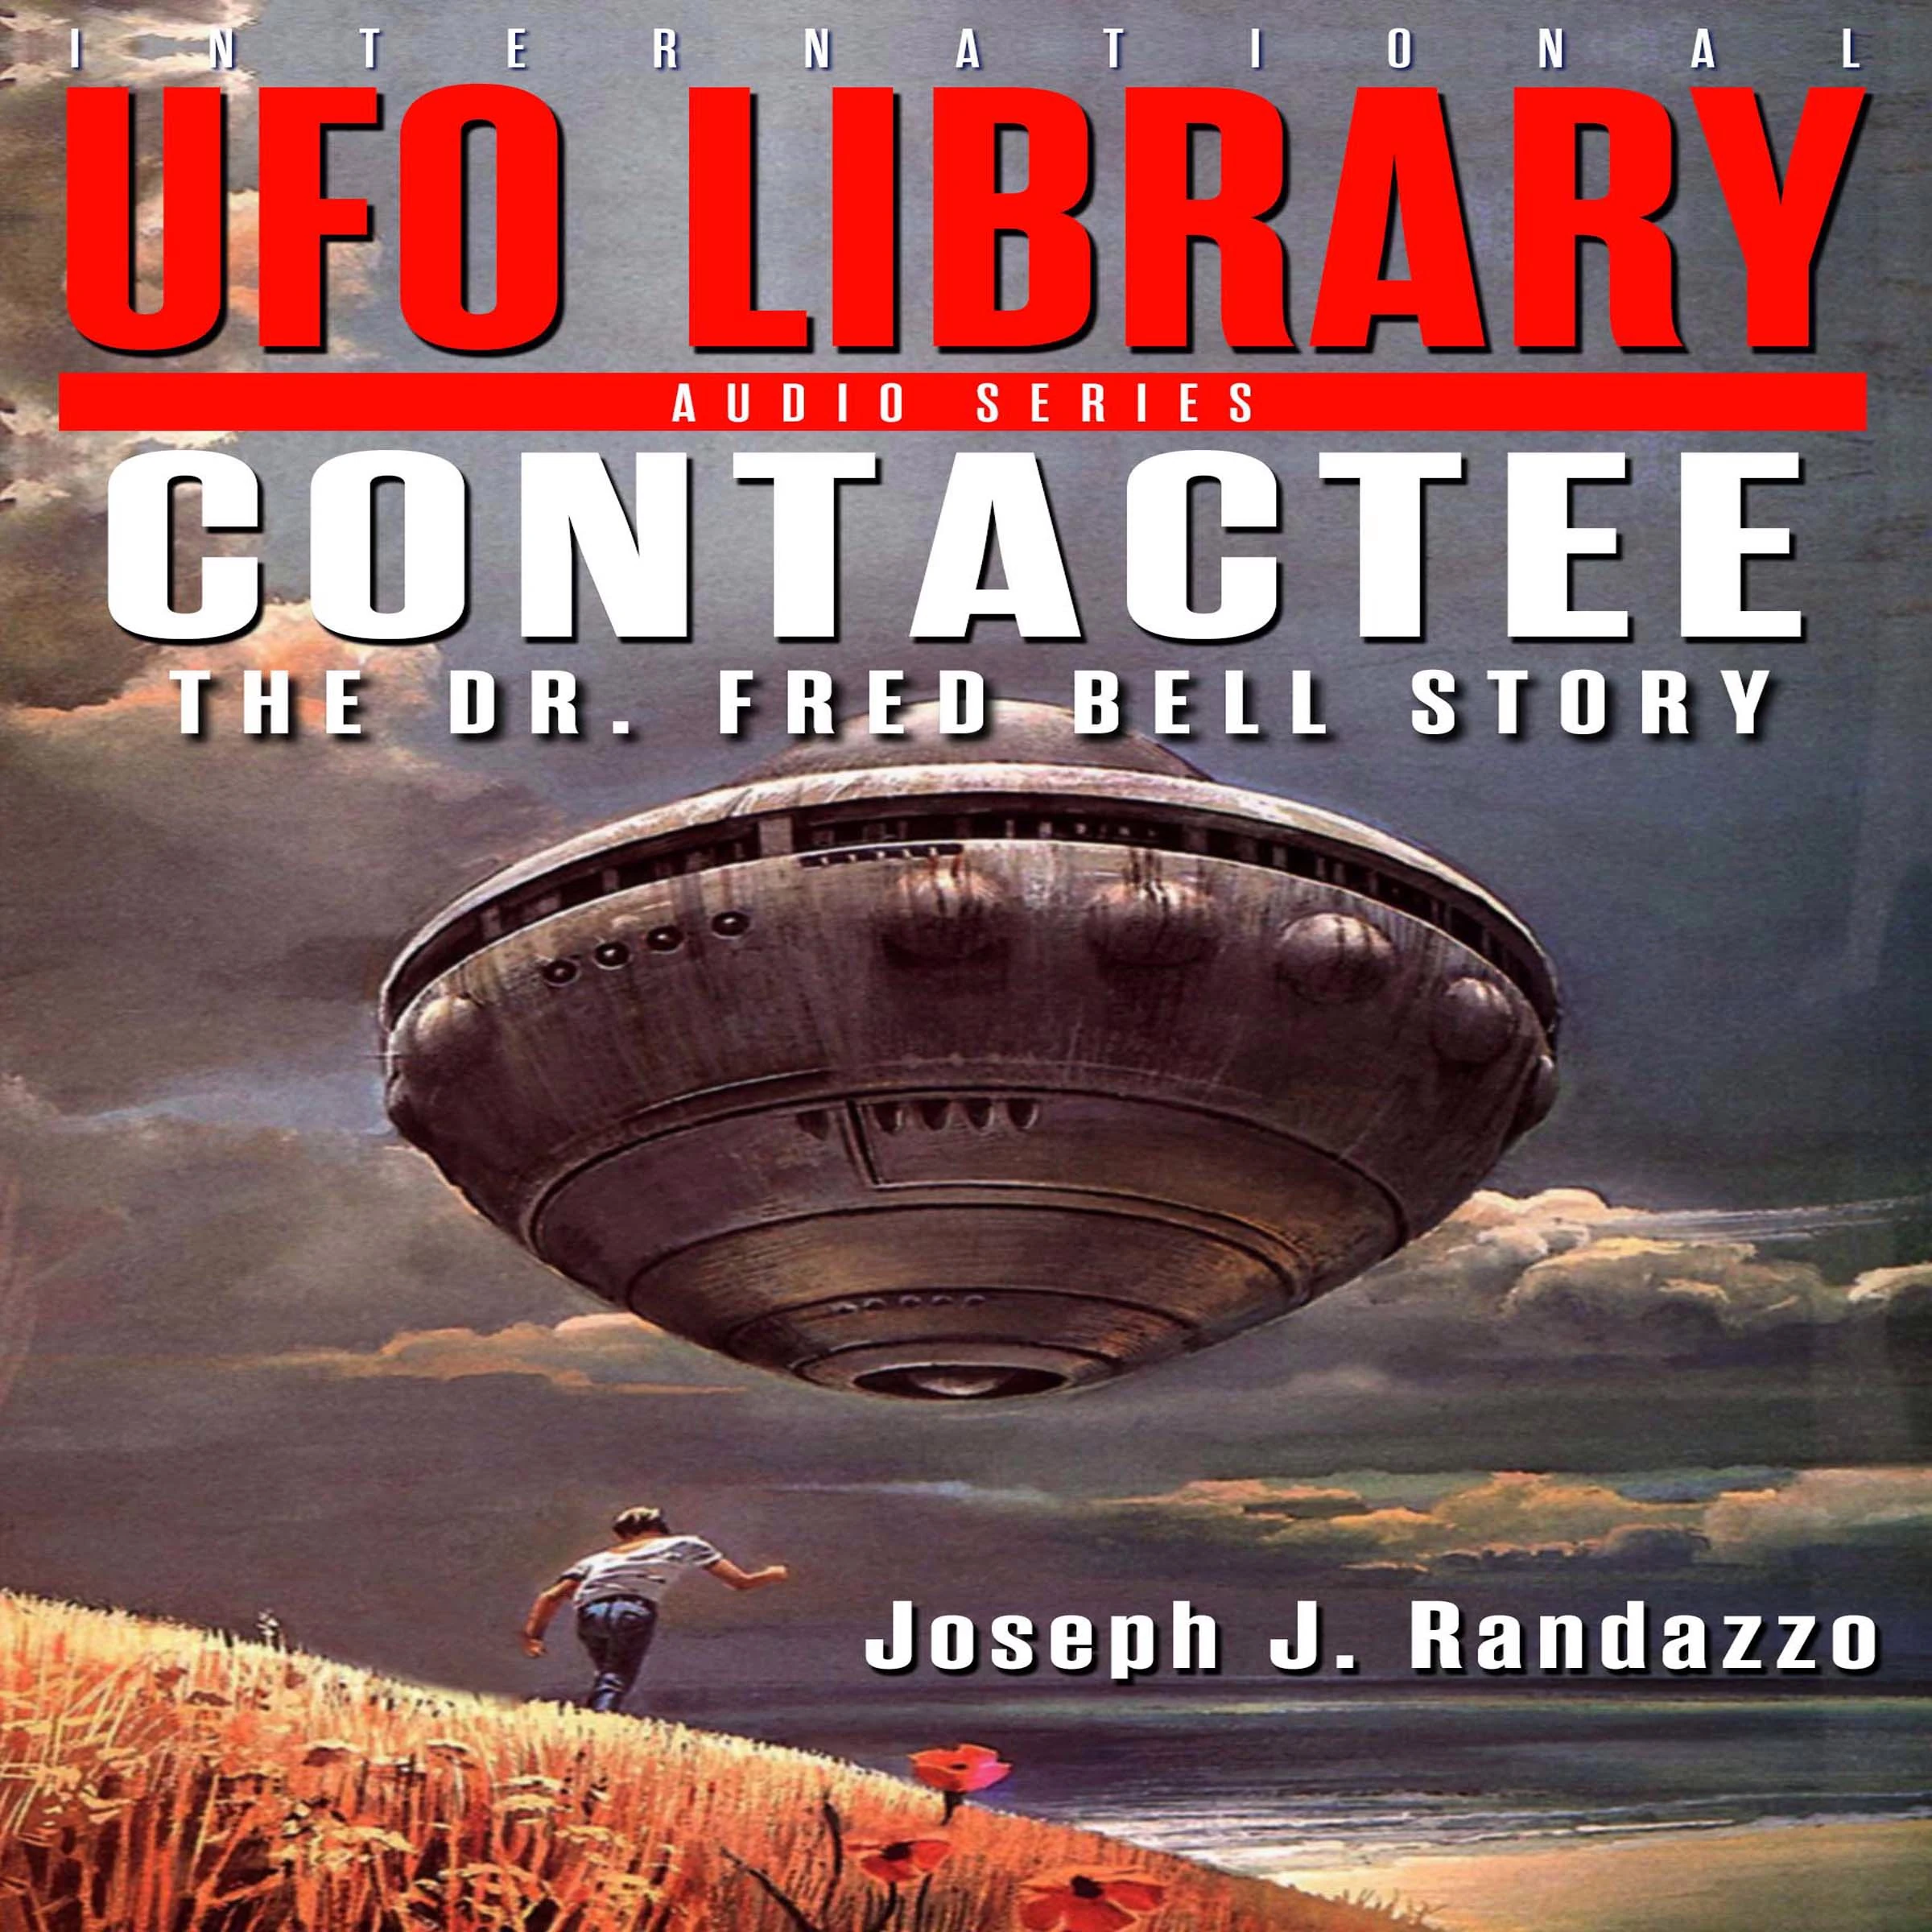 U.F.O LIBRARY - CONTACTEE: The Dr. Fred Bell Story by Joseph J. Randazzo Audiobook